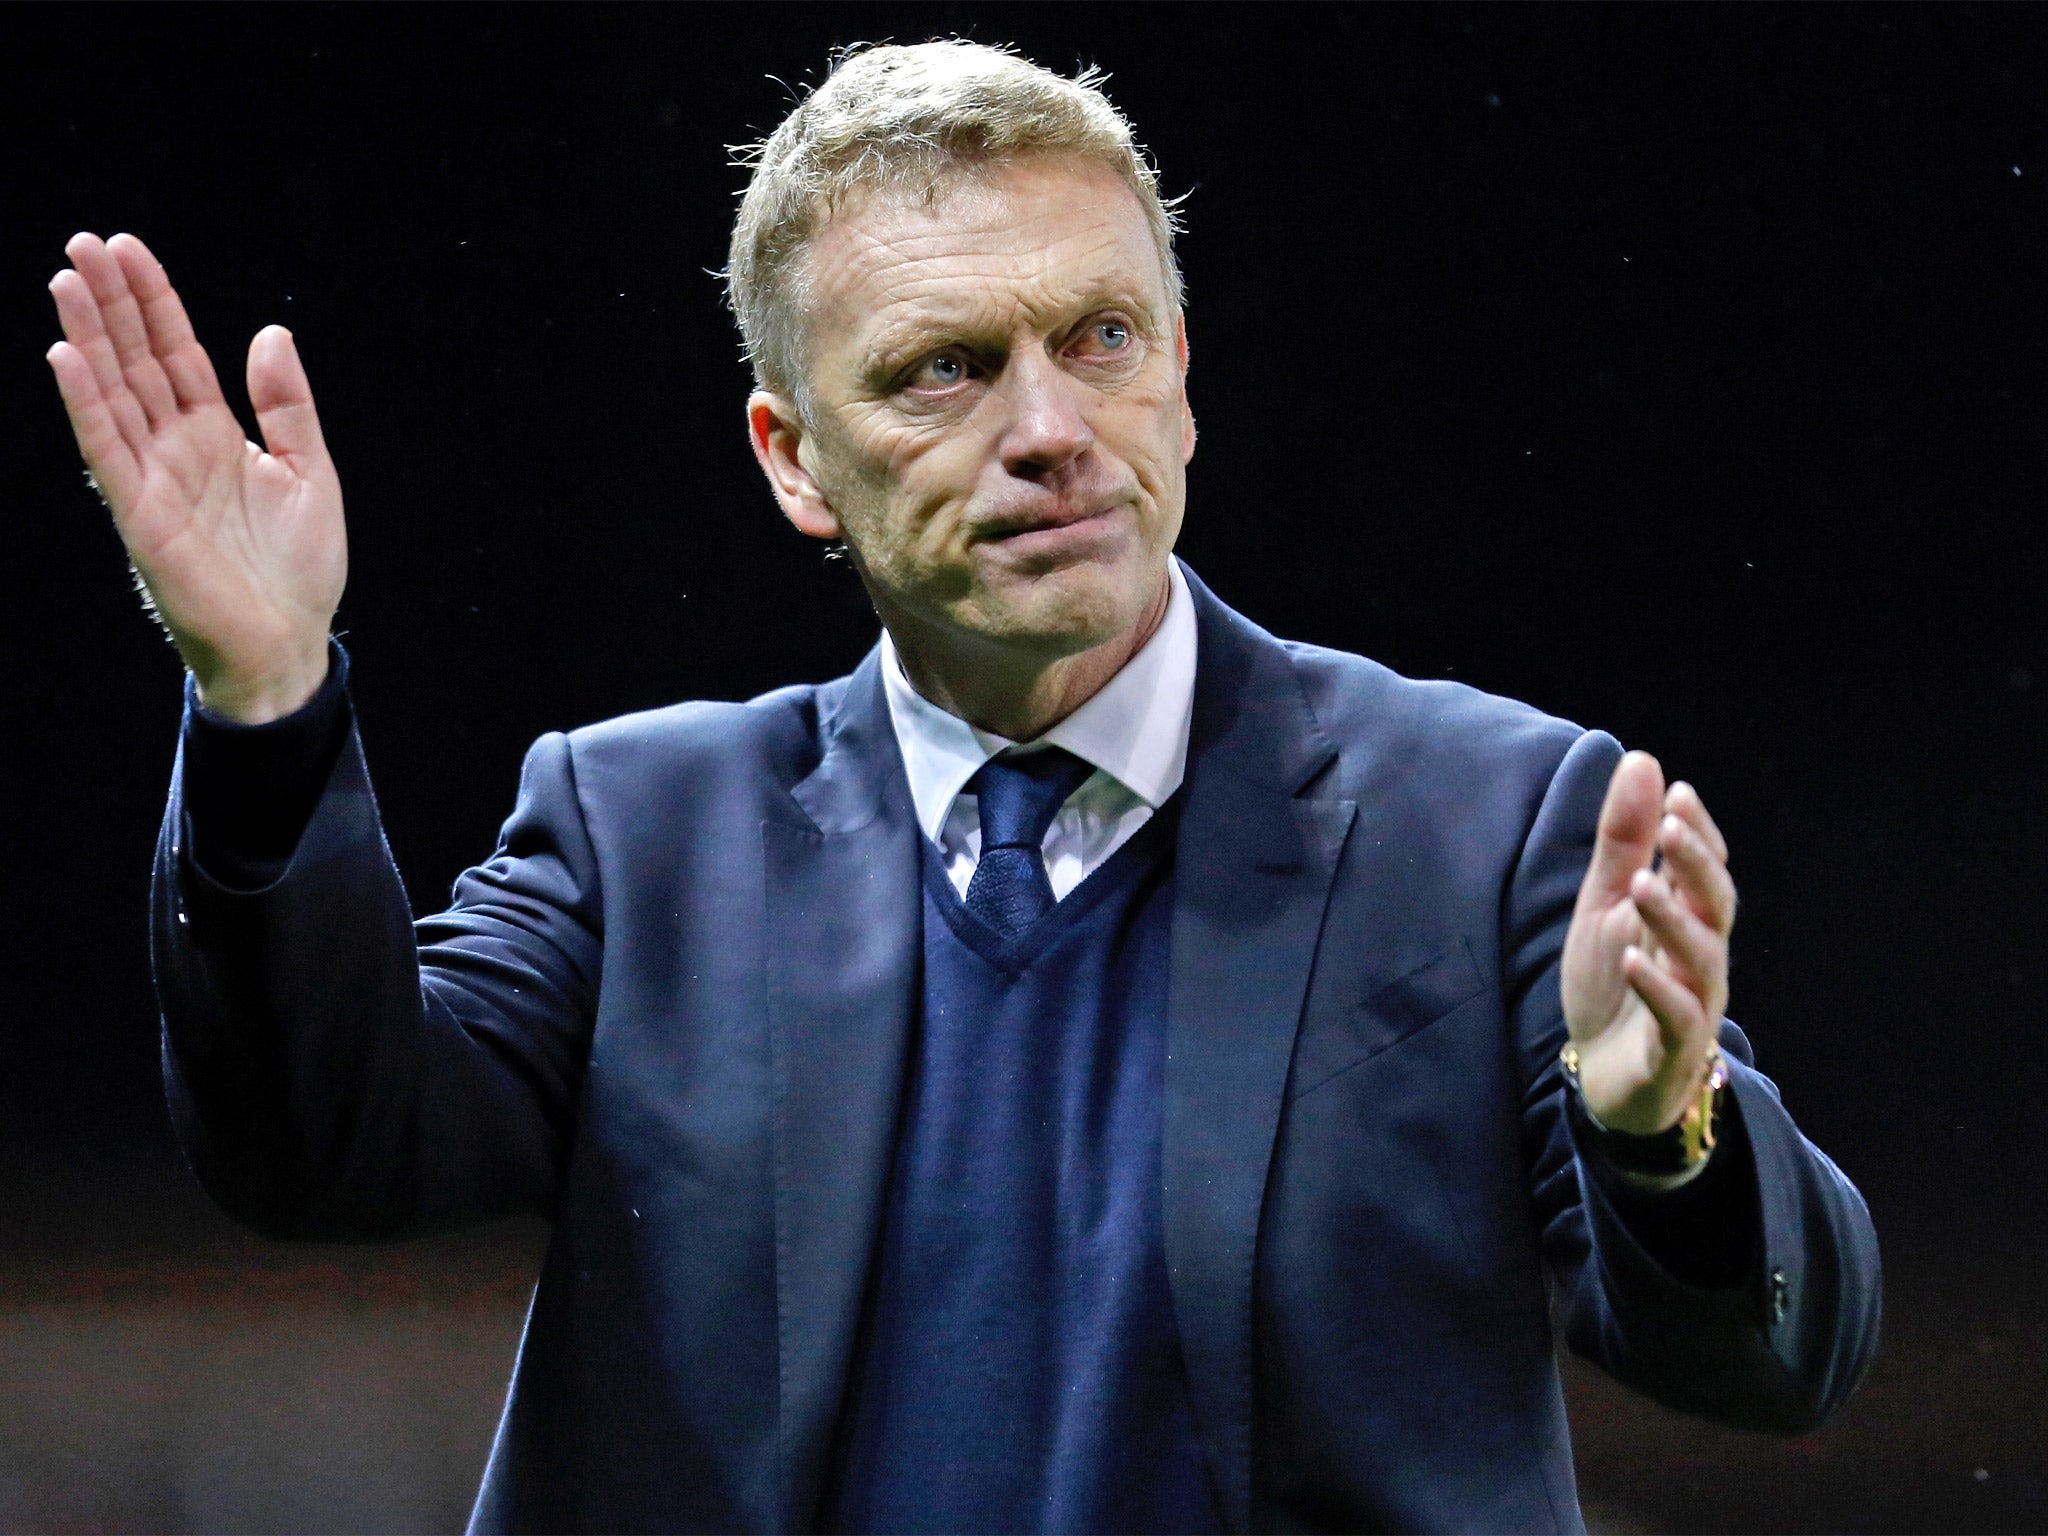 David Moyes built a solid record at Everton on limited means